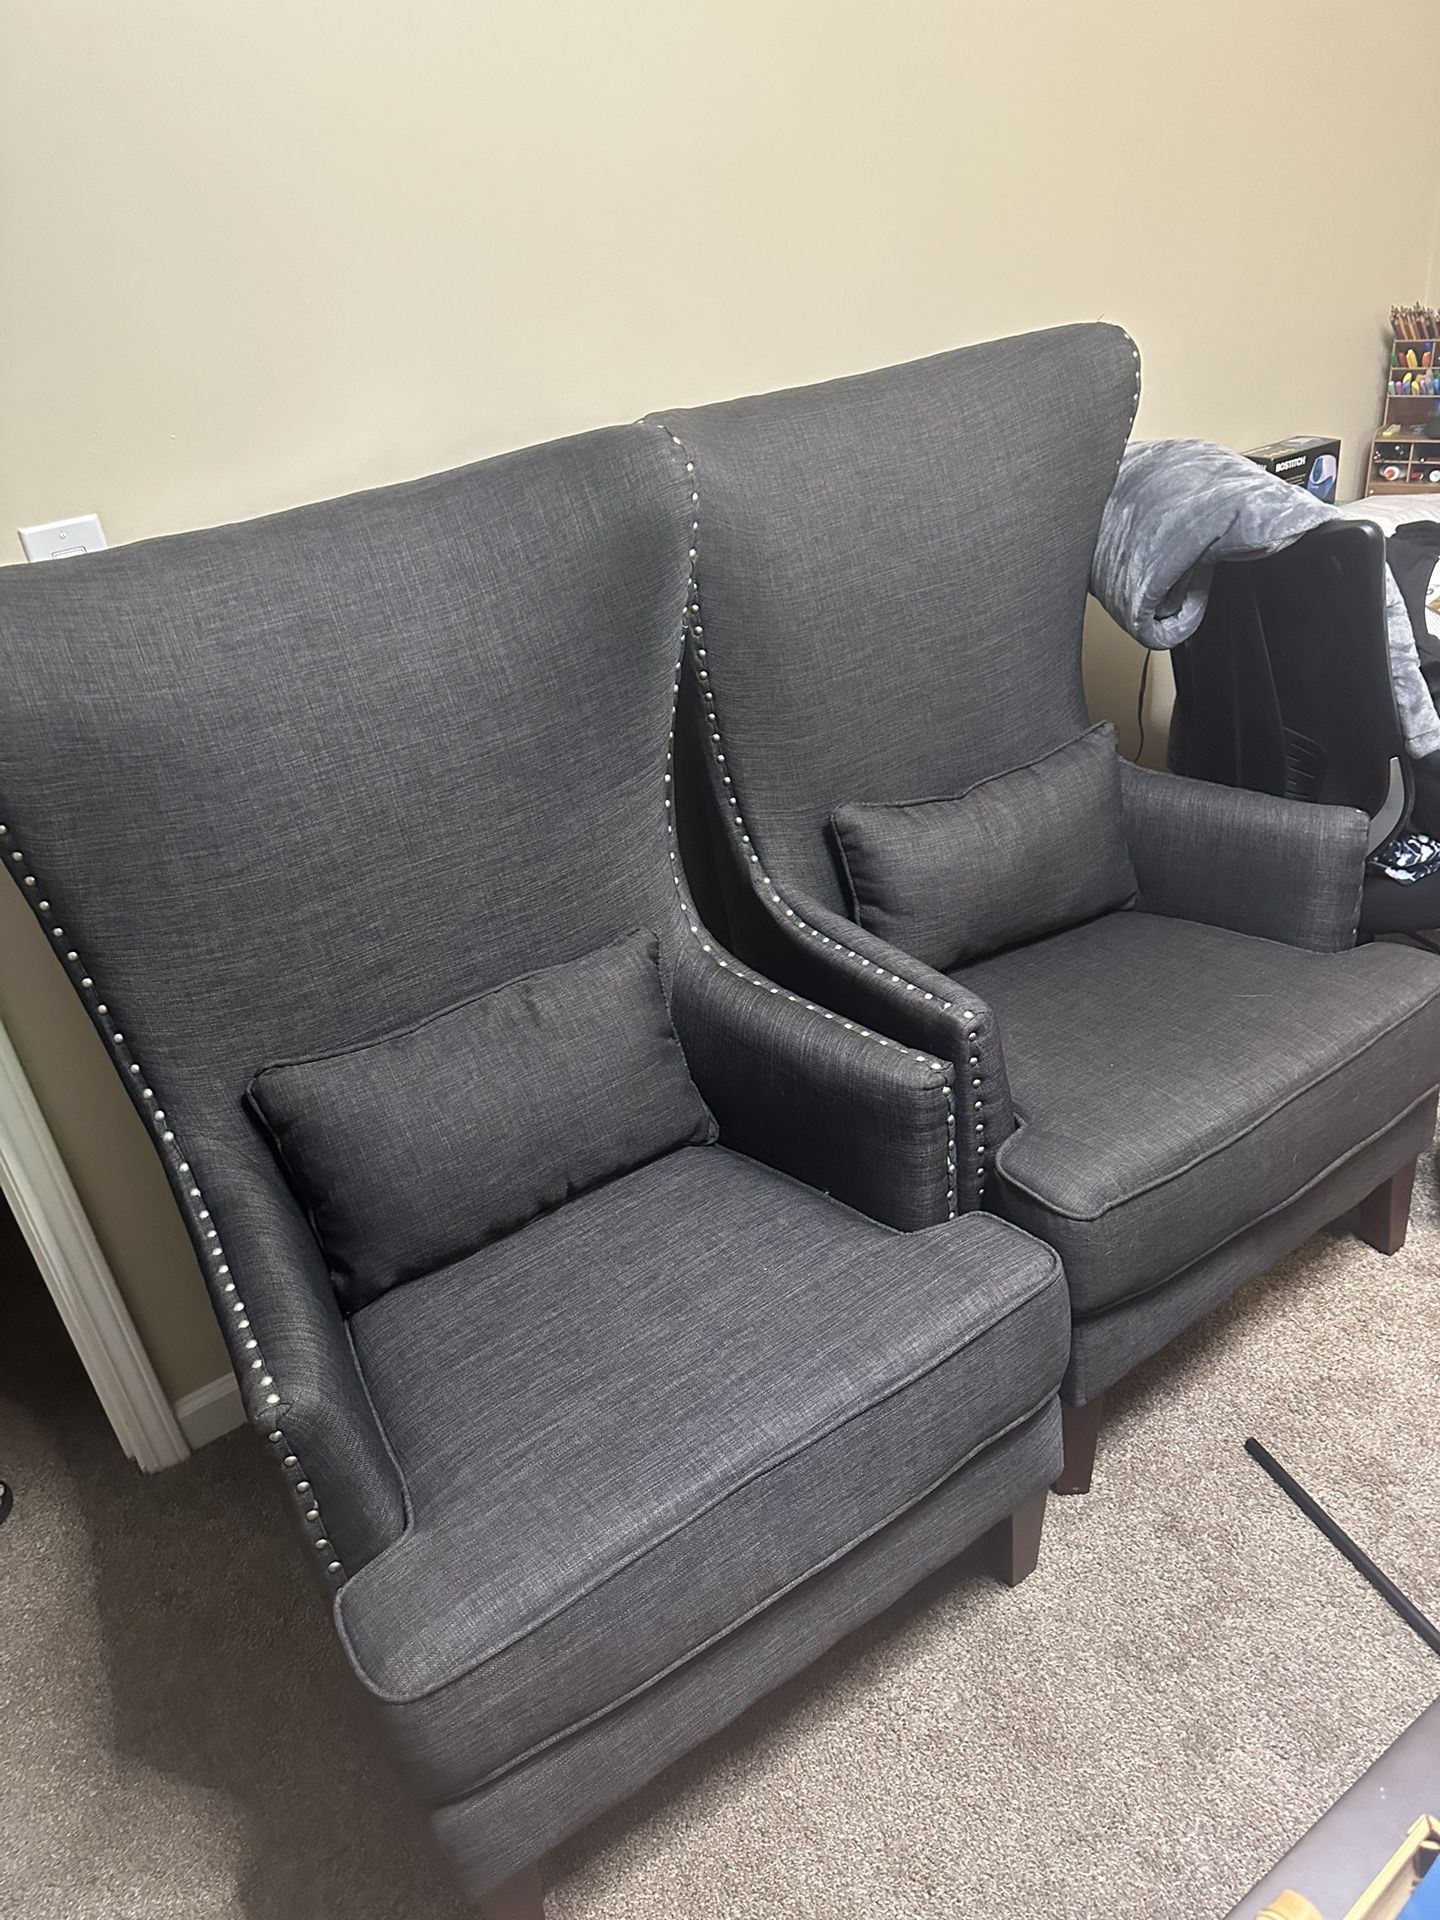 PENDING. Beautiful Set of Accent Chairs